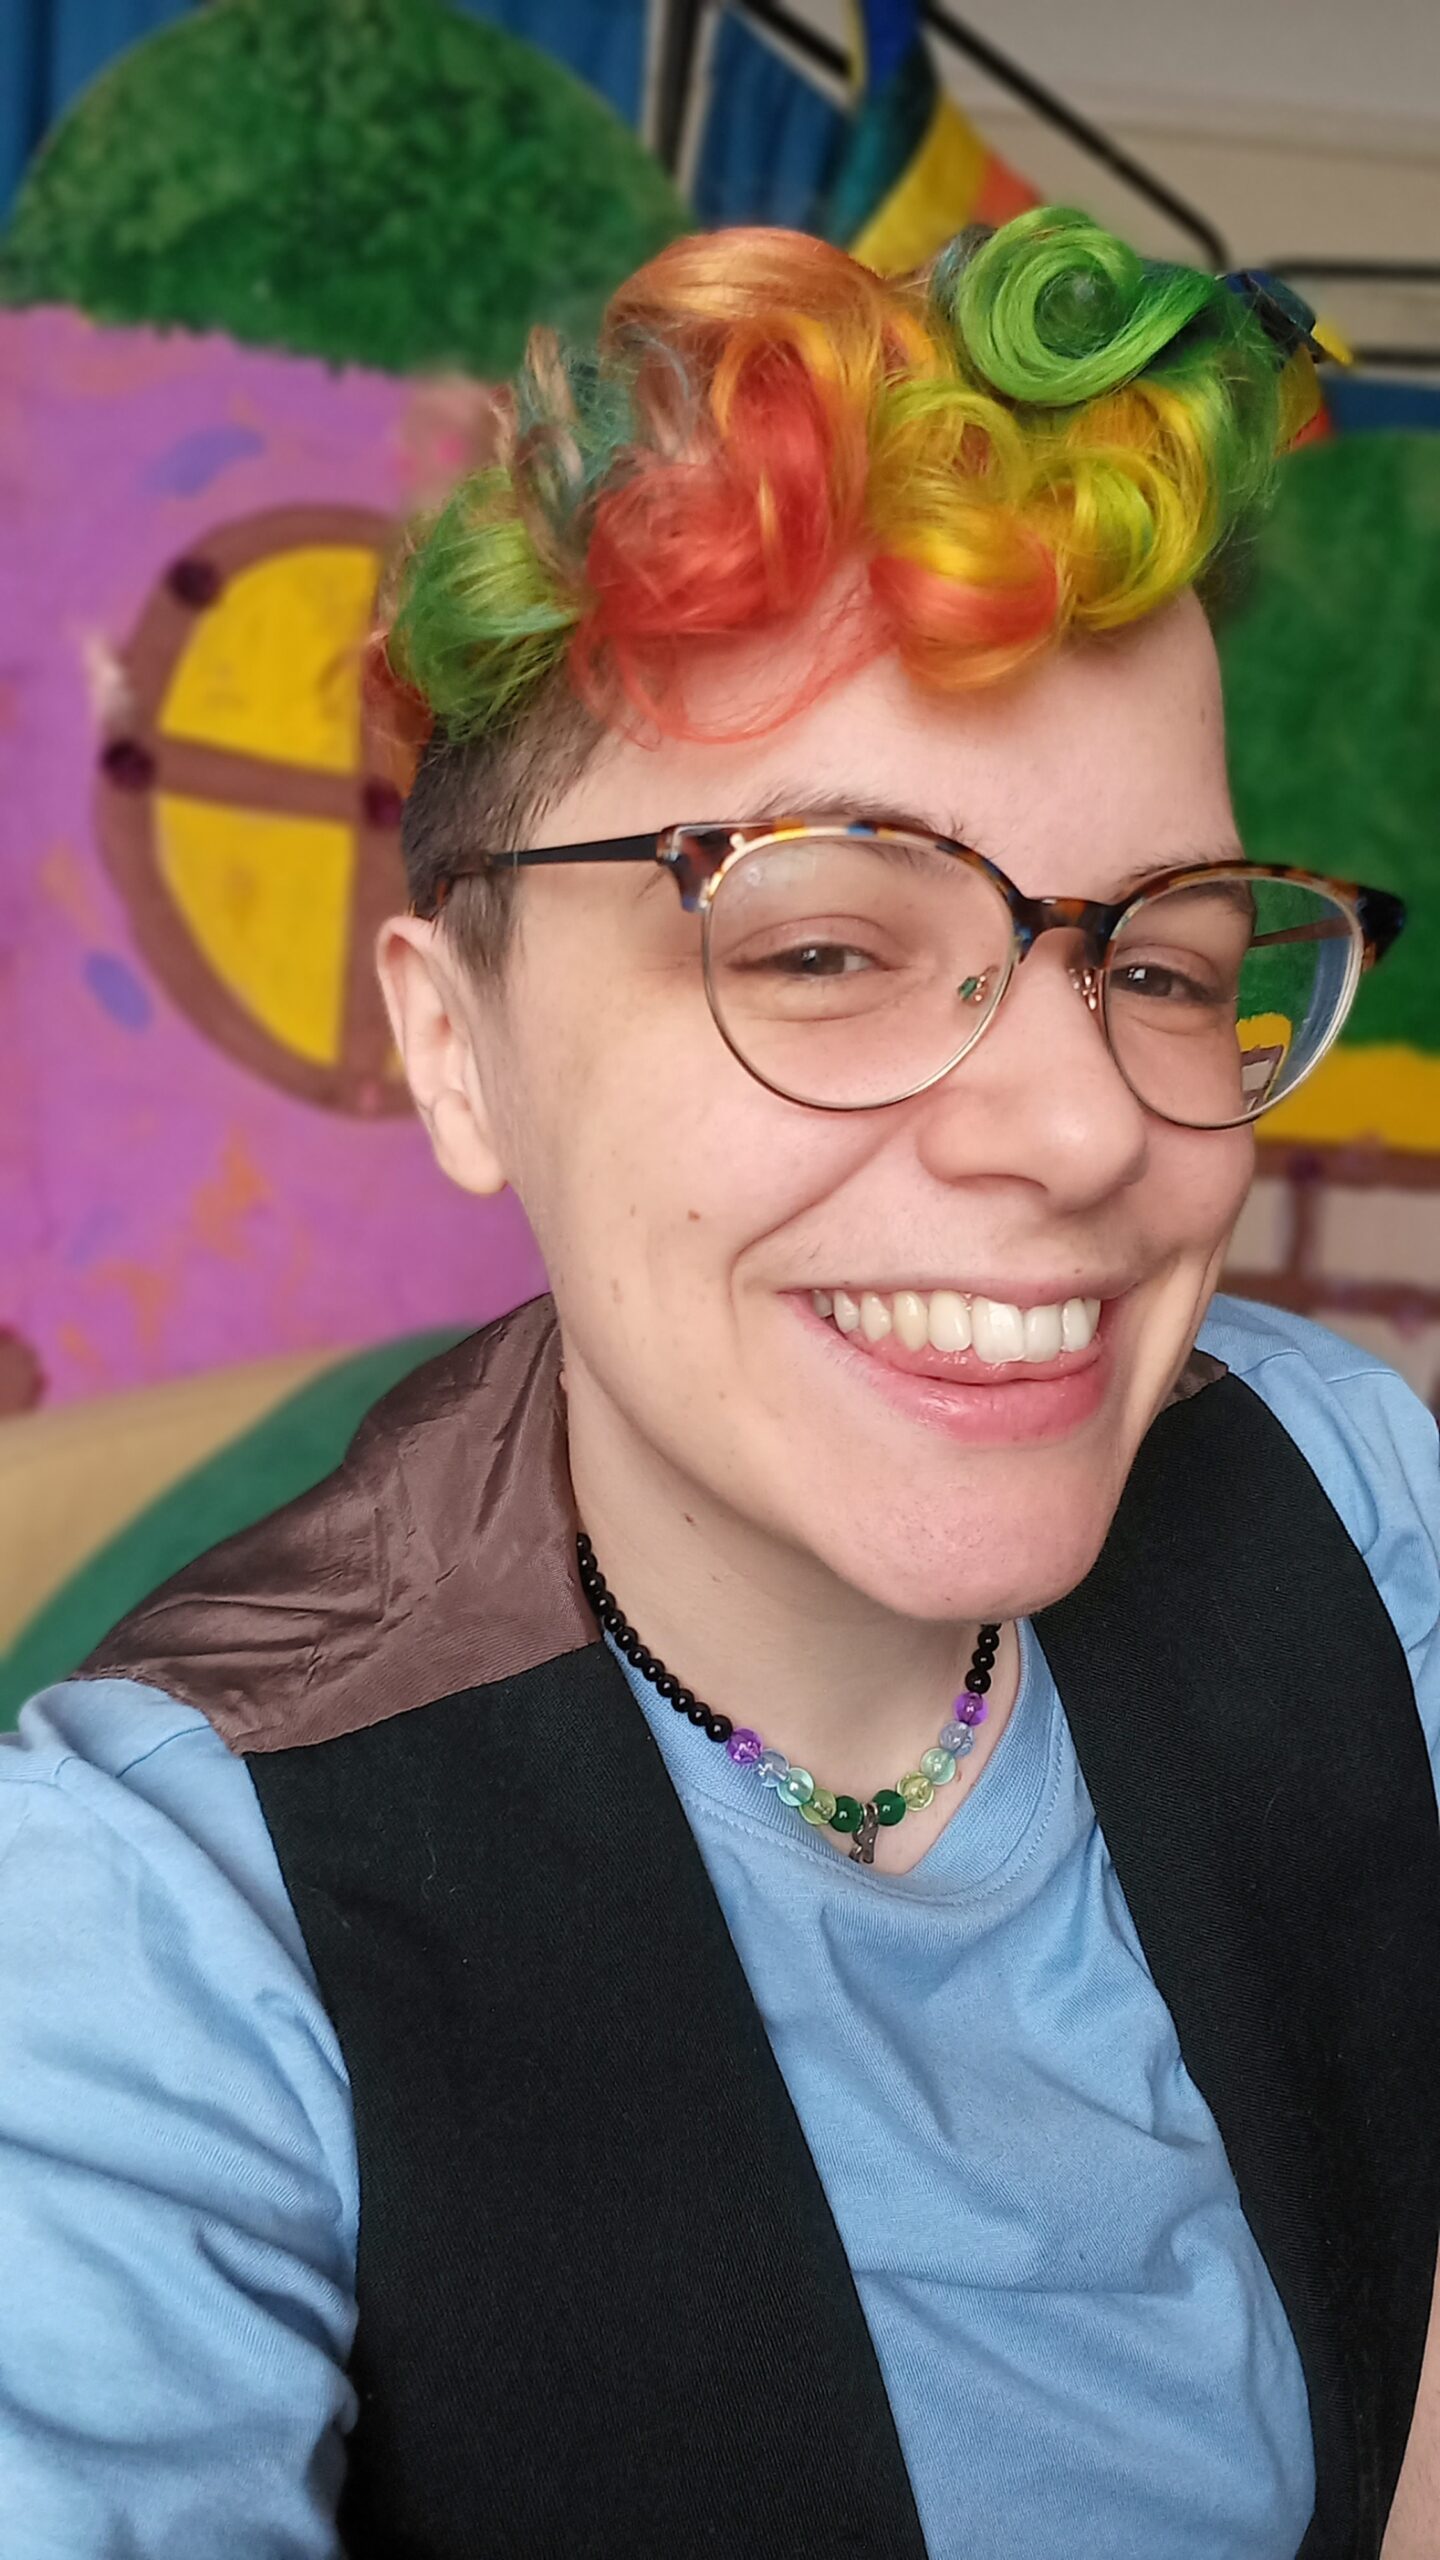 A slim white human, leaning forwards to the camera, smiling joyfully showing their teeth. They are wearing round horn rimmed glasses and have vivid rainbow coloured curly hair on top of their head and shaved sides. They are wearing a sky blue t-shirt with a black waistcoat, and a necklace with black, purple, blue, and green beads. Behind them is a painted backdrop which is bright pink with a circular painted window in yellow and brown.